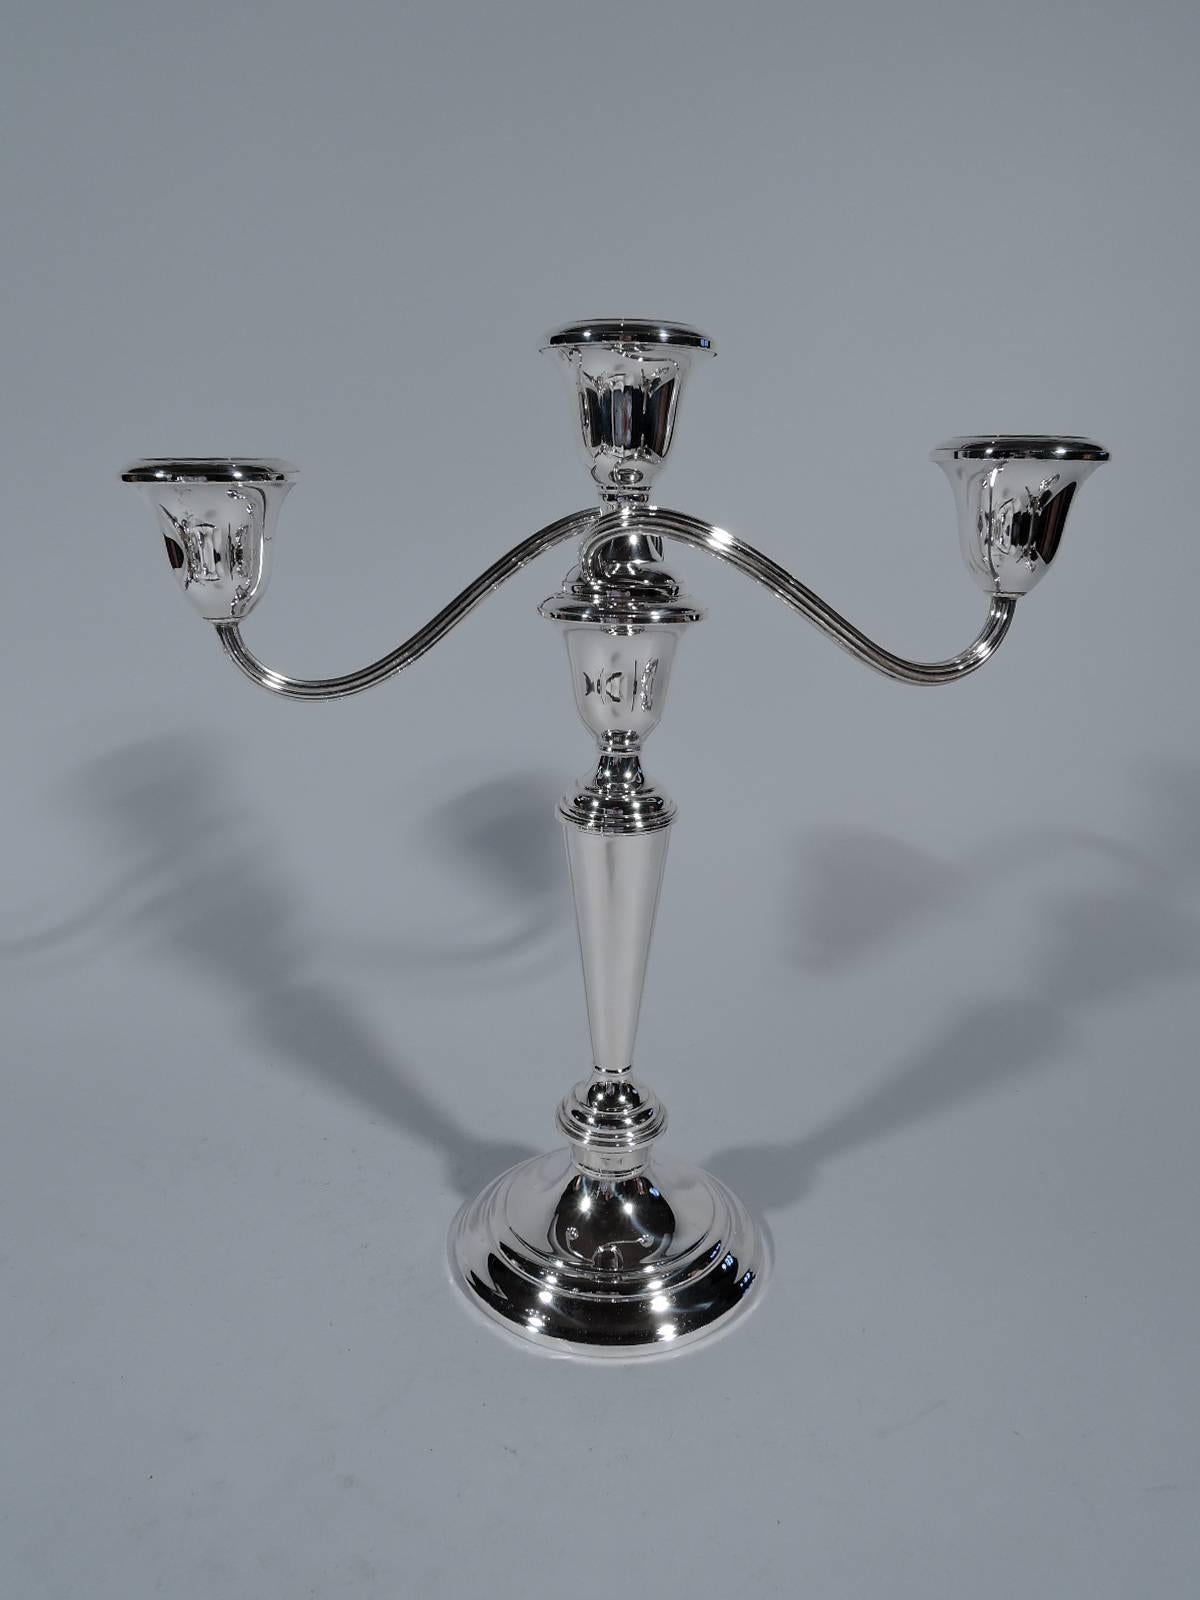 Pair of sterling silver three-light candelabra. Made by Gorham in Providence. Each: tapering columnar shaft and stepped foot. Central light with two reeded arms, each terminating in single light. Can be converted to candlesticks and low candelabra.